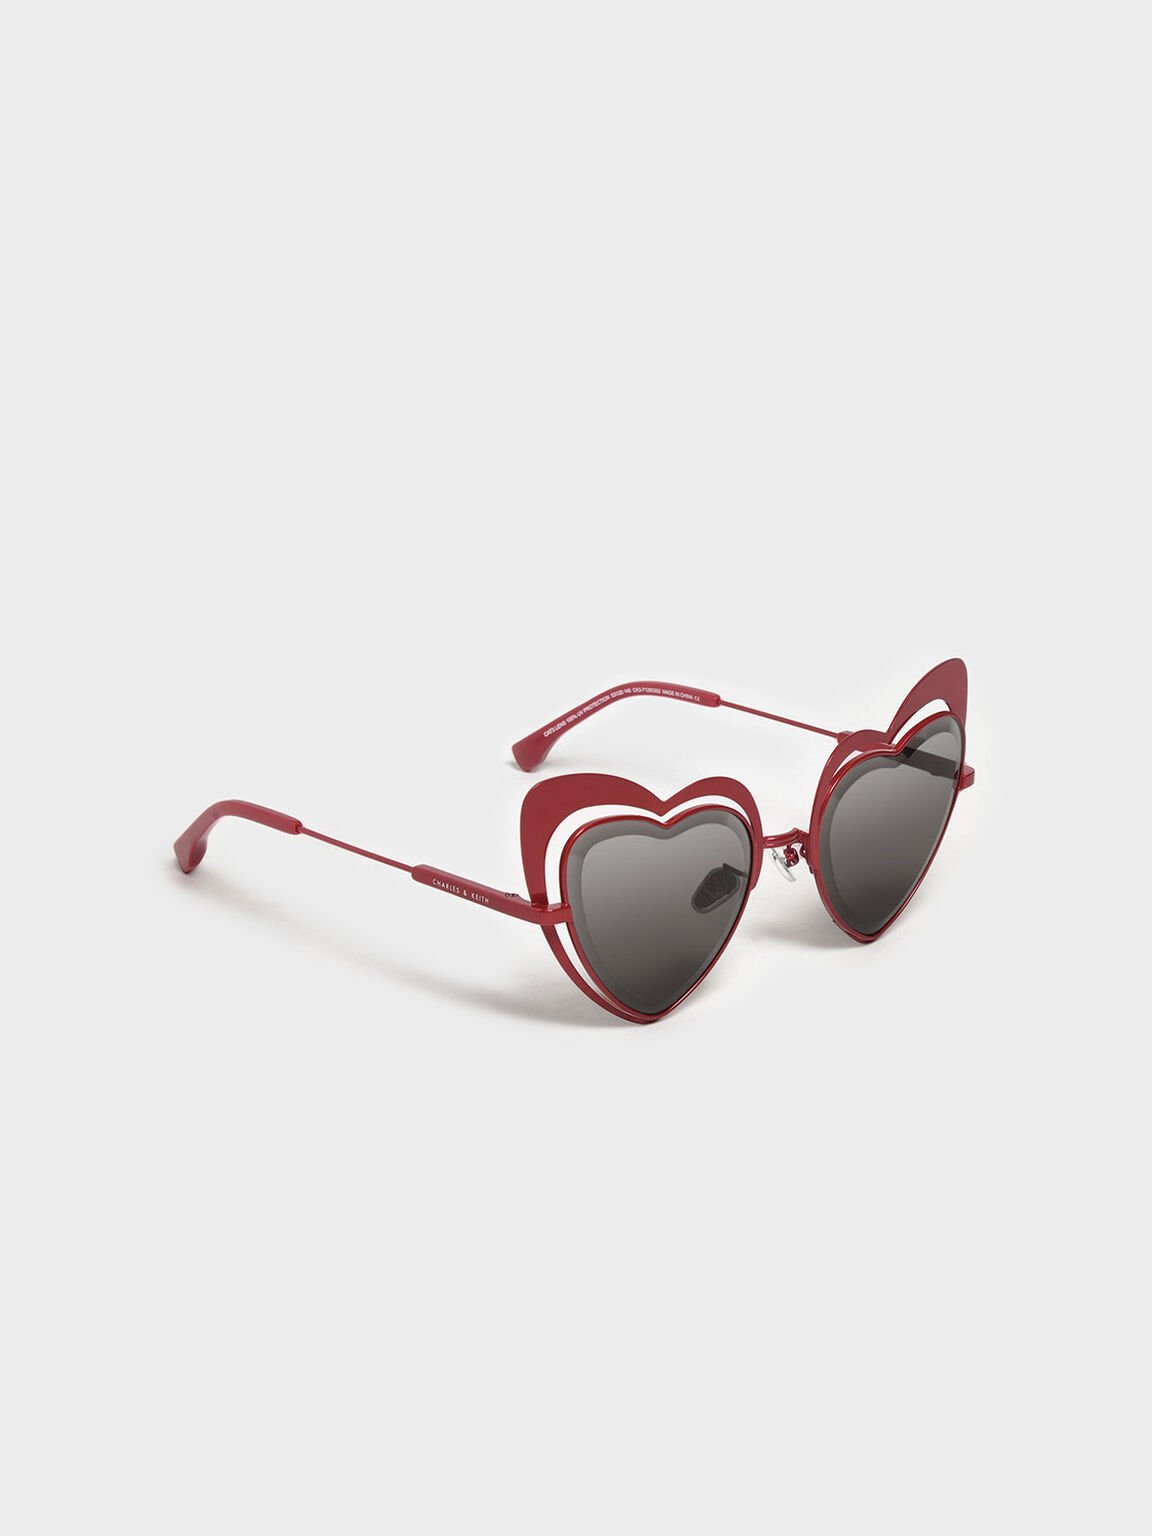 Heart-Shaped Sunglasses, Red, hi-res